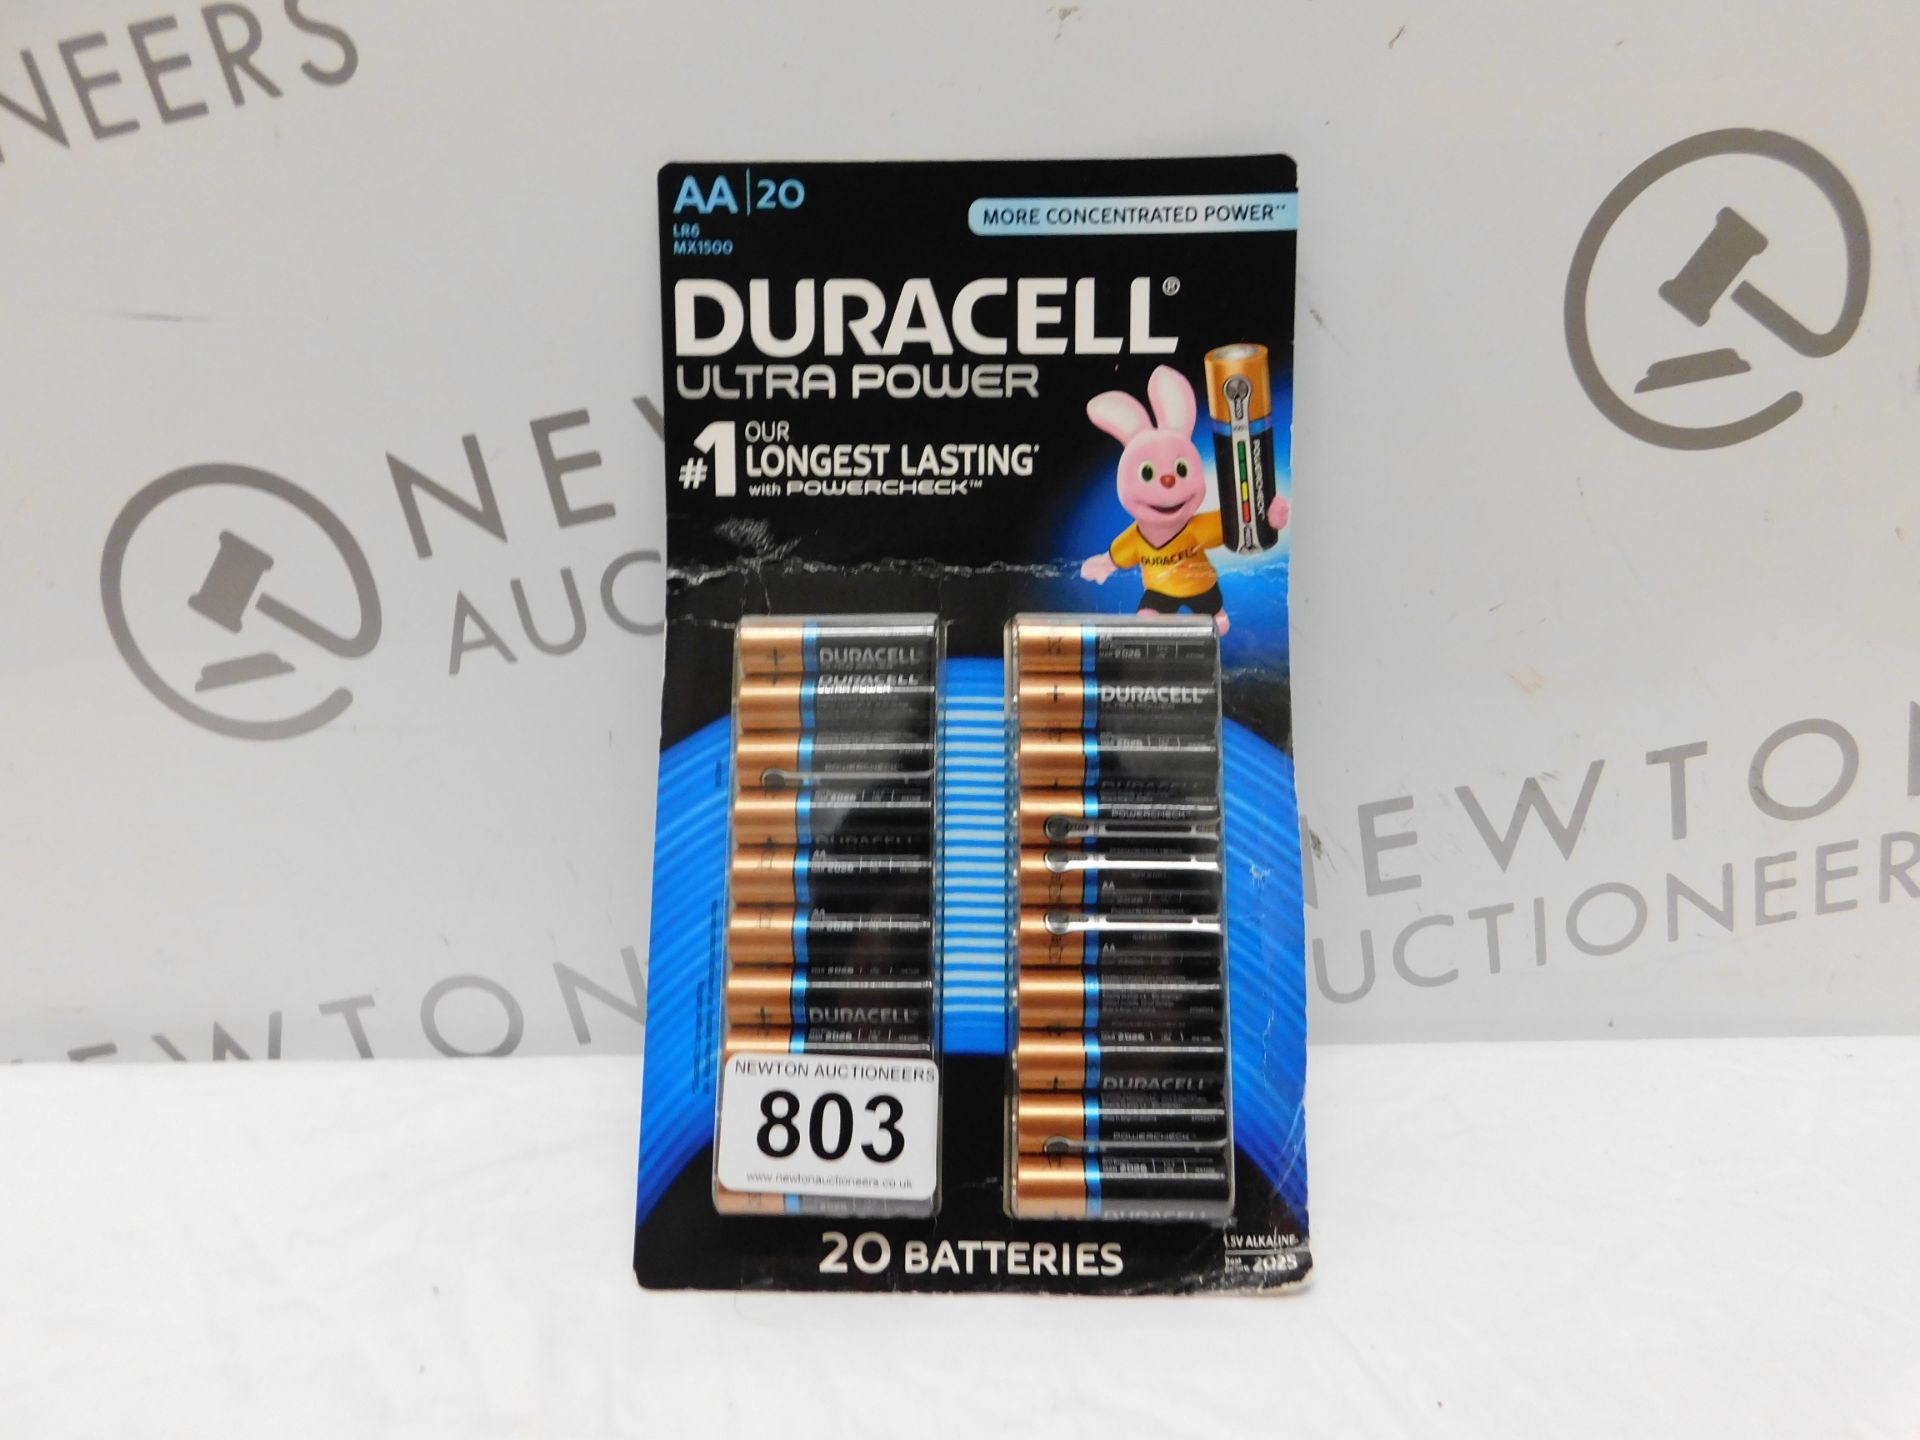 1 PACK OF APPROX 20 DURACELL AA BATTRIES RRP £49.99